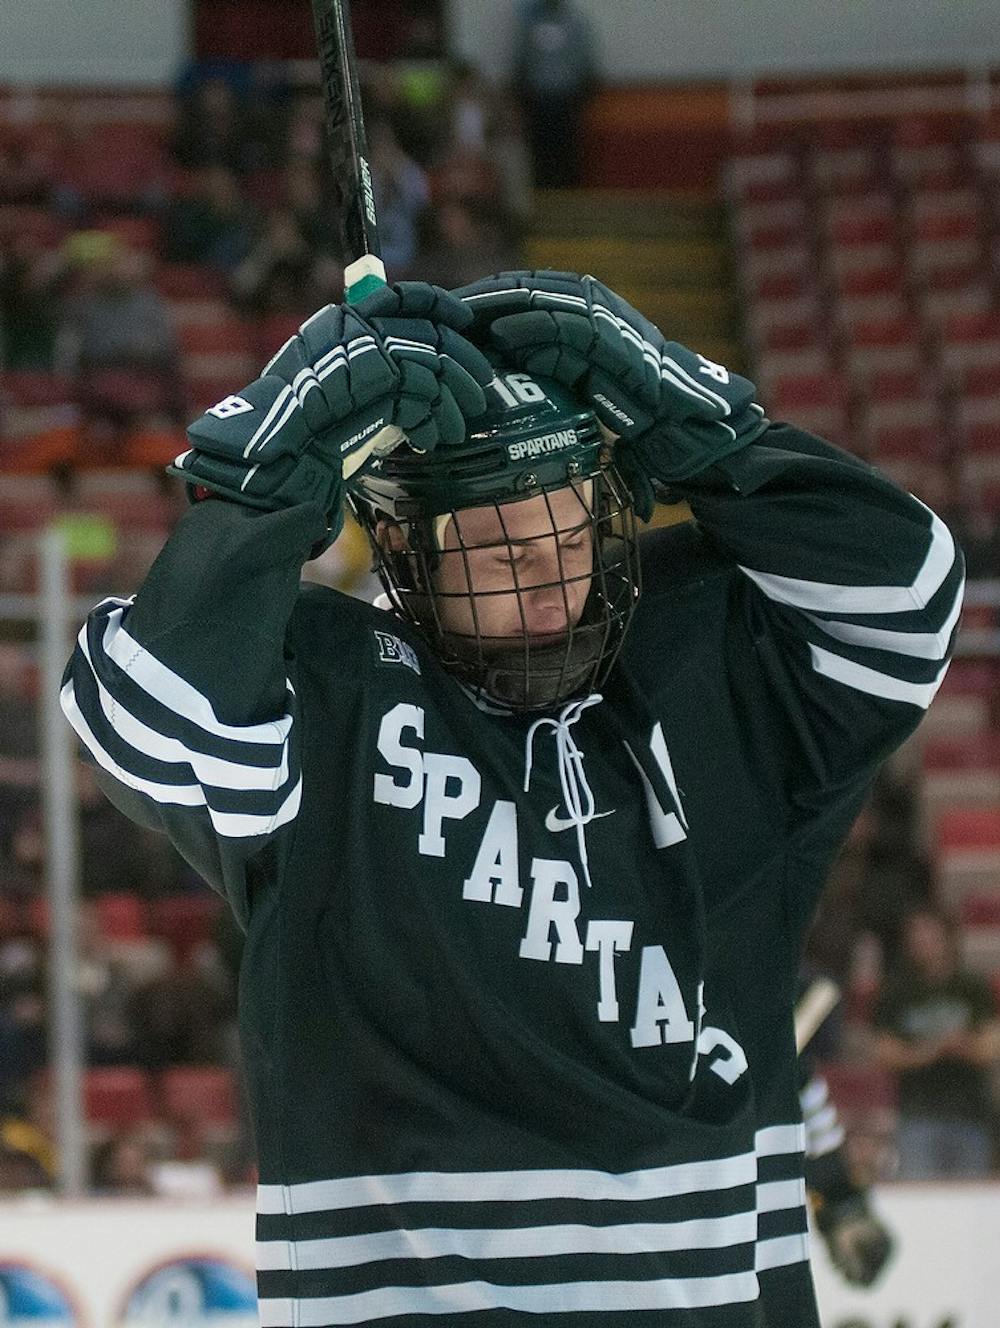 	<p>Senior forward Dean Chelios reacts to a shot on the Wolverine net during the game against Michigan on Jan. 23, 2014, at Joe Louis Arena in Detroit. The Spartans lost to the Wolverines, 2-1. Danyelle Morrow/The State News</p>